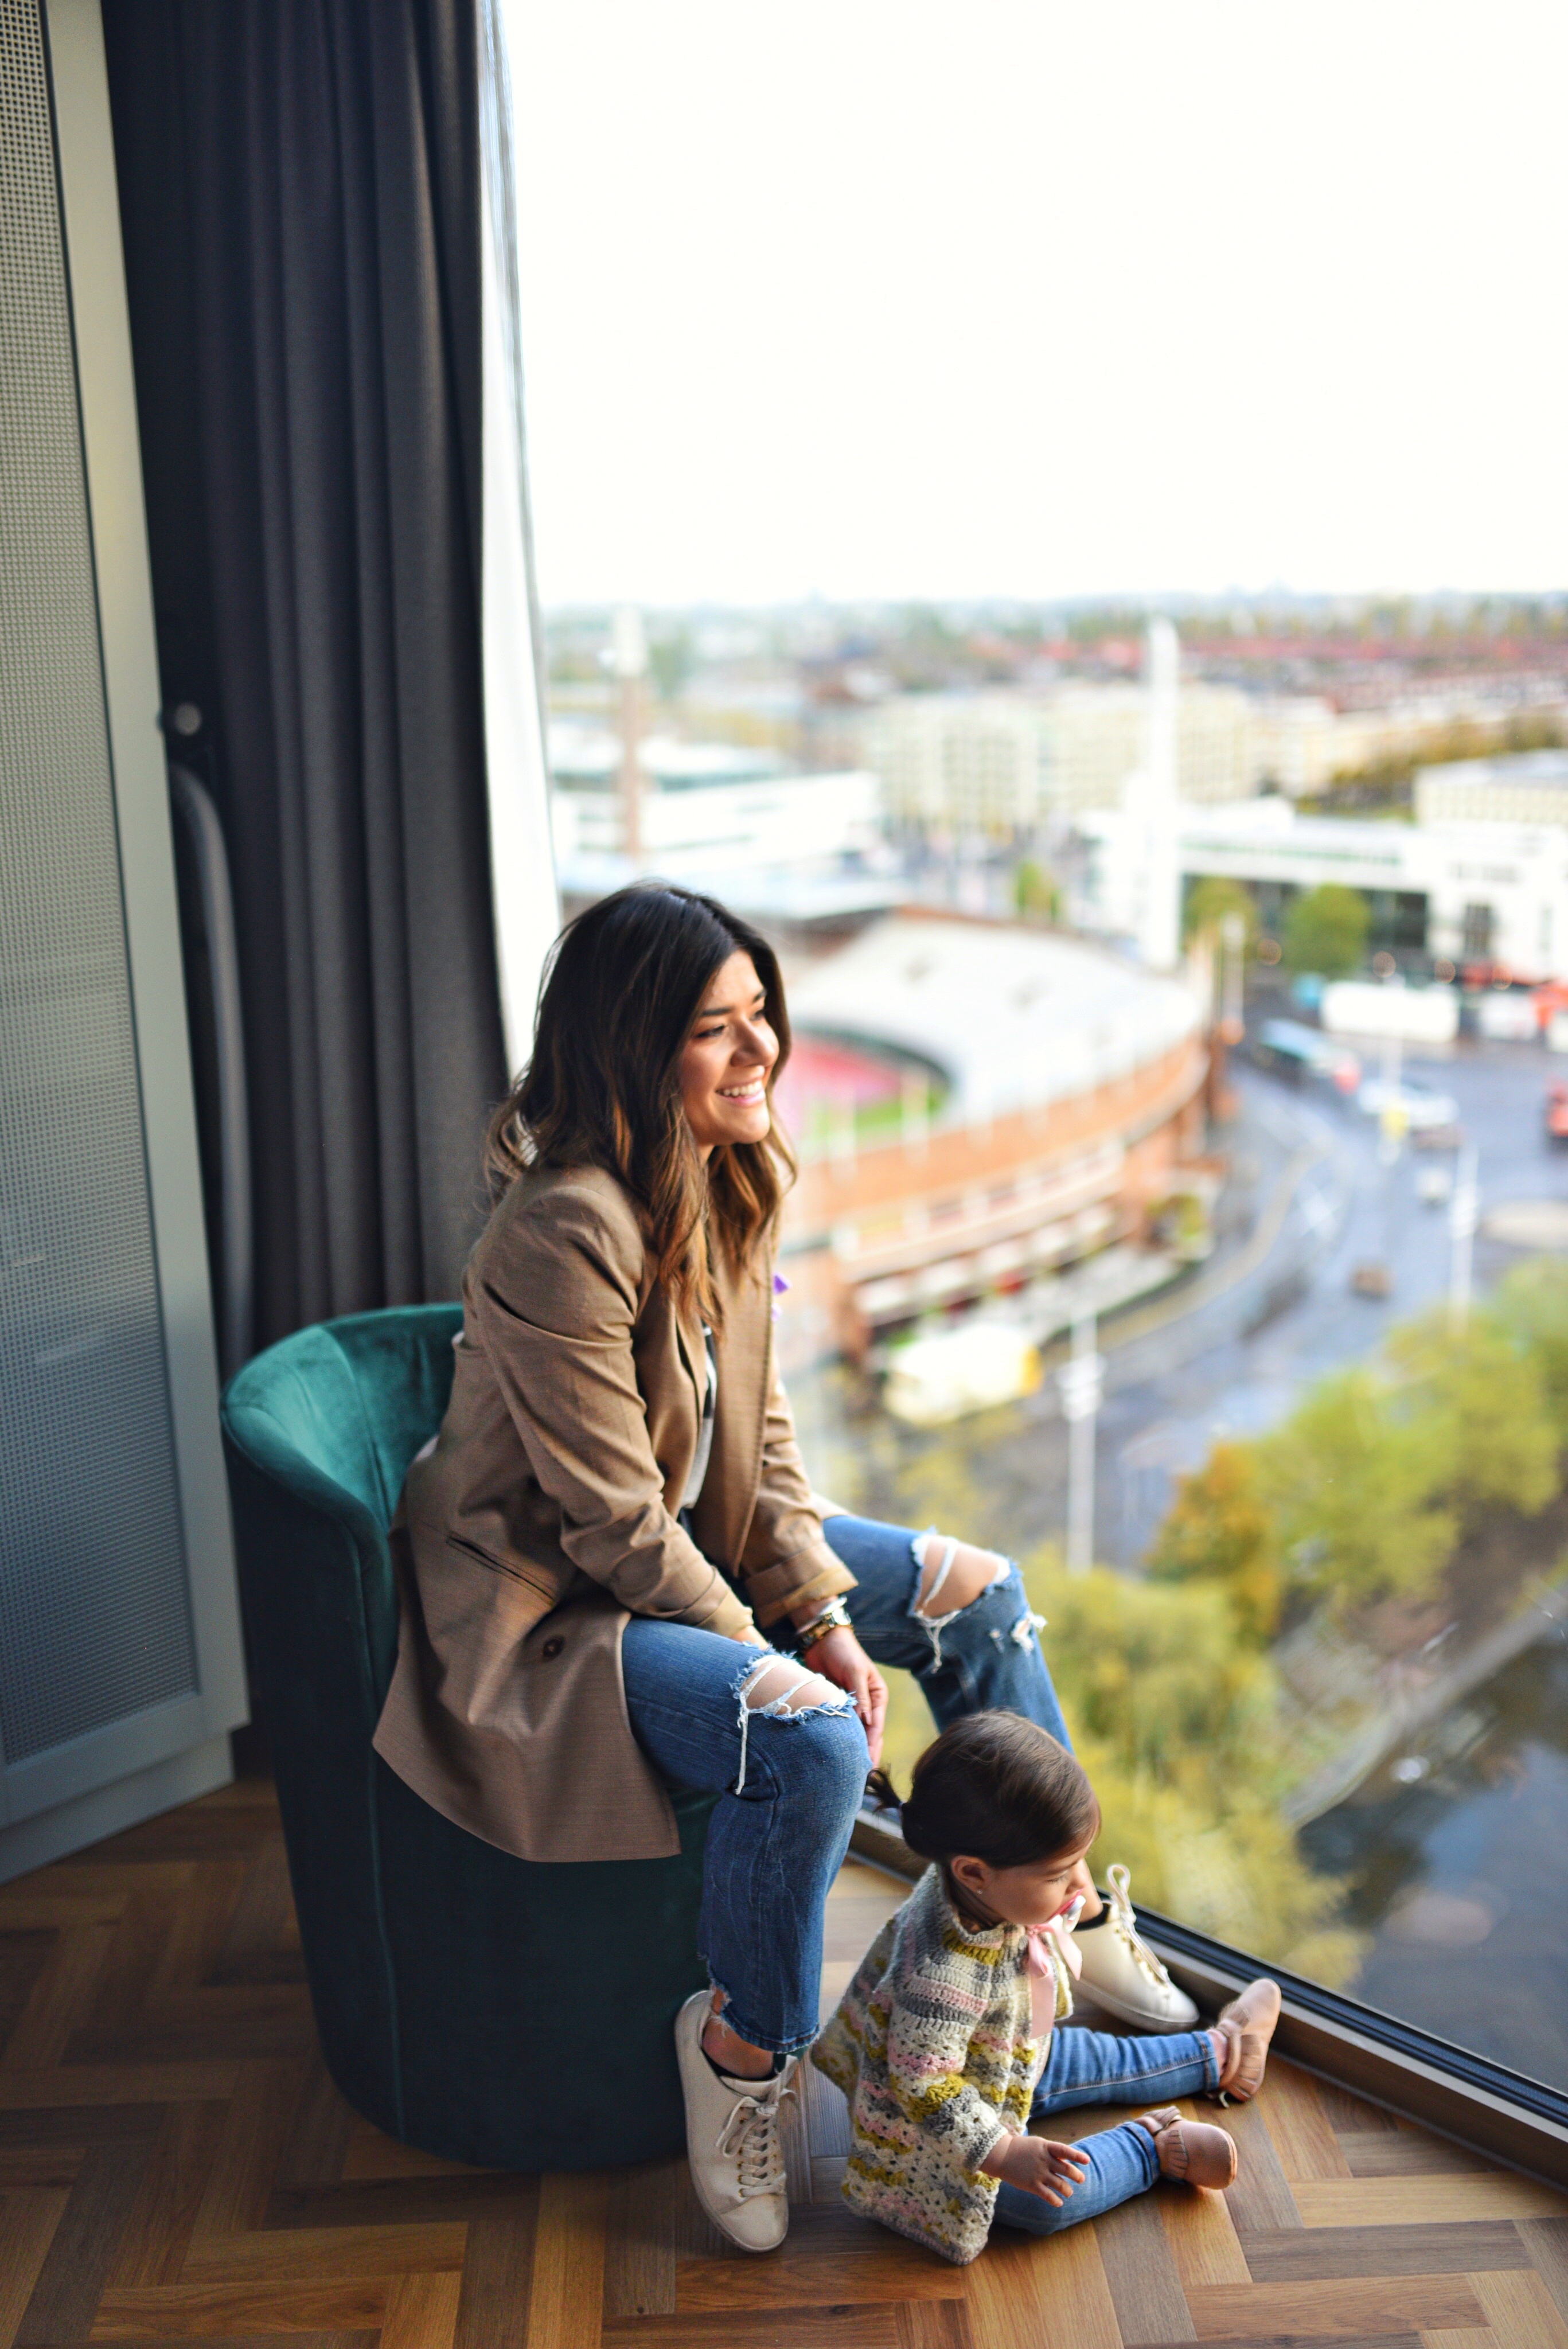 Carolina Hellal of Chic Talk and her baby Sofia in Amsterdam, Holland